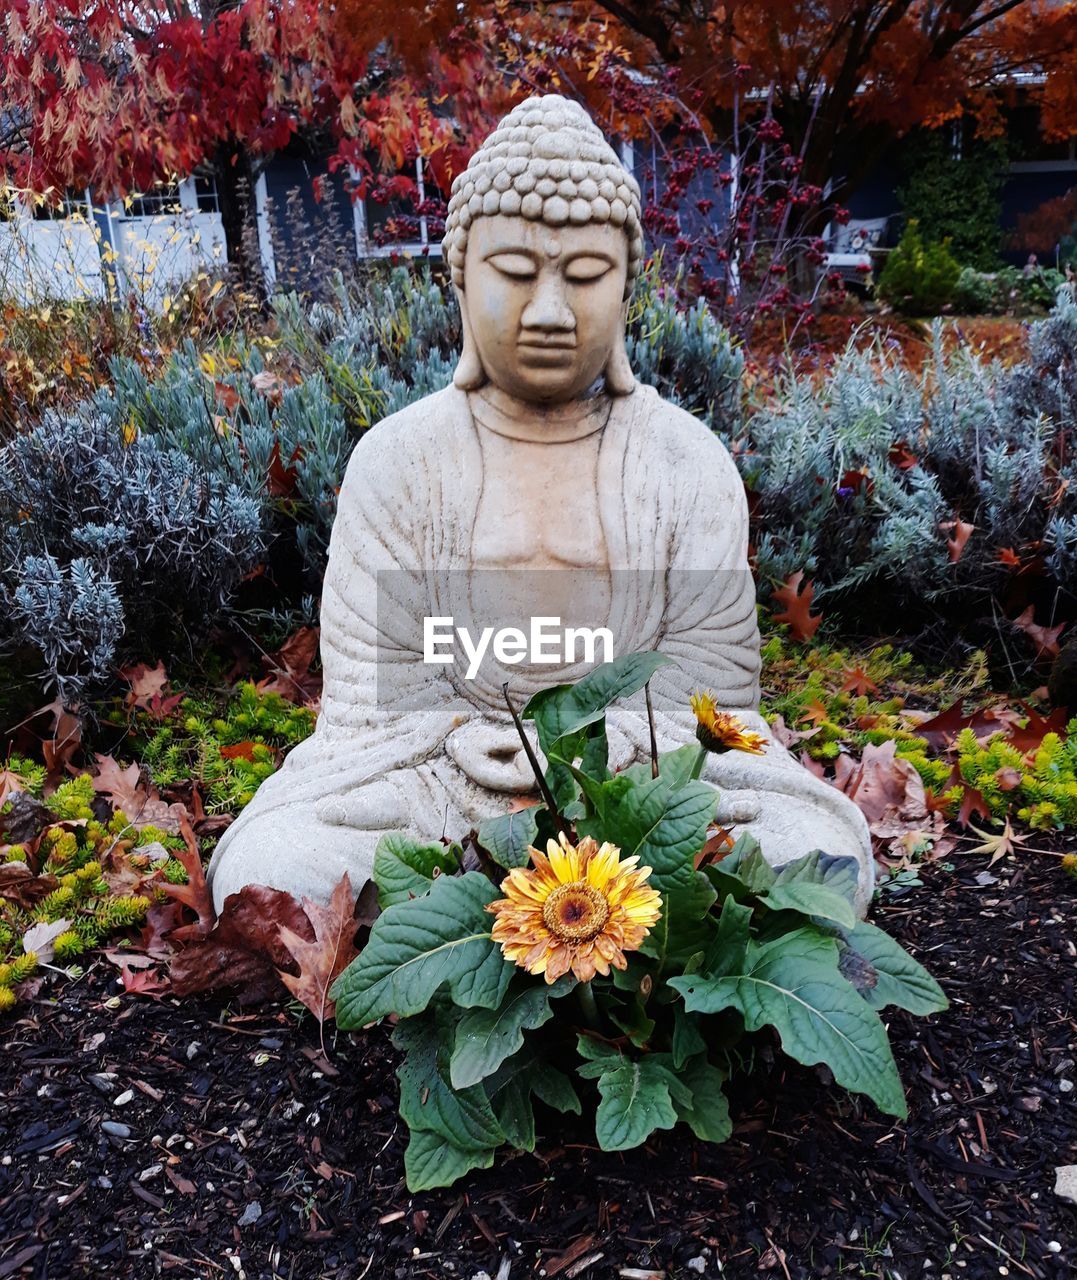 VIEW OF BUDDHA STATUE ON PLANTS